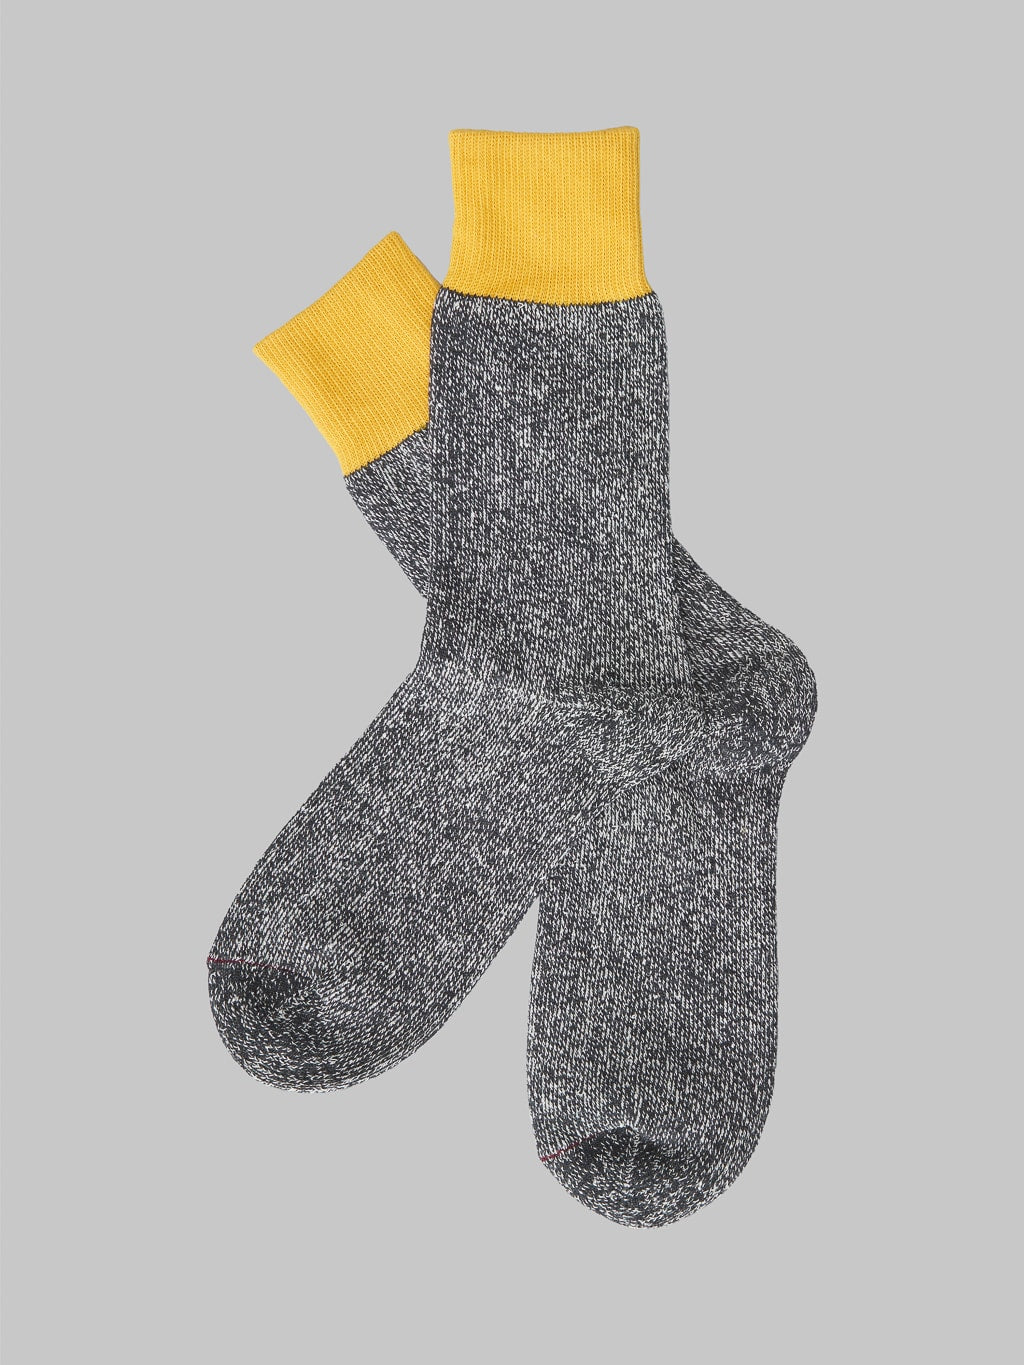 Rototo Double Face Socks Silk Yellow Charcoal Texture